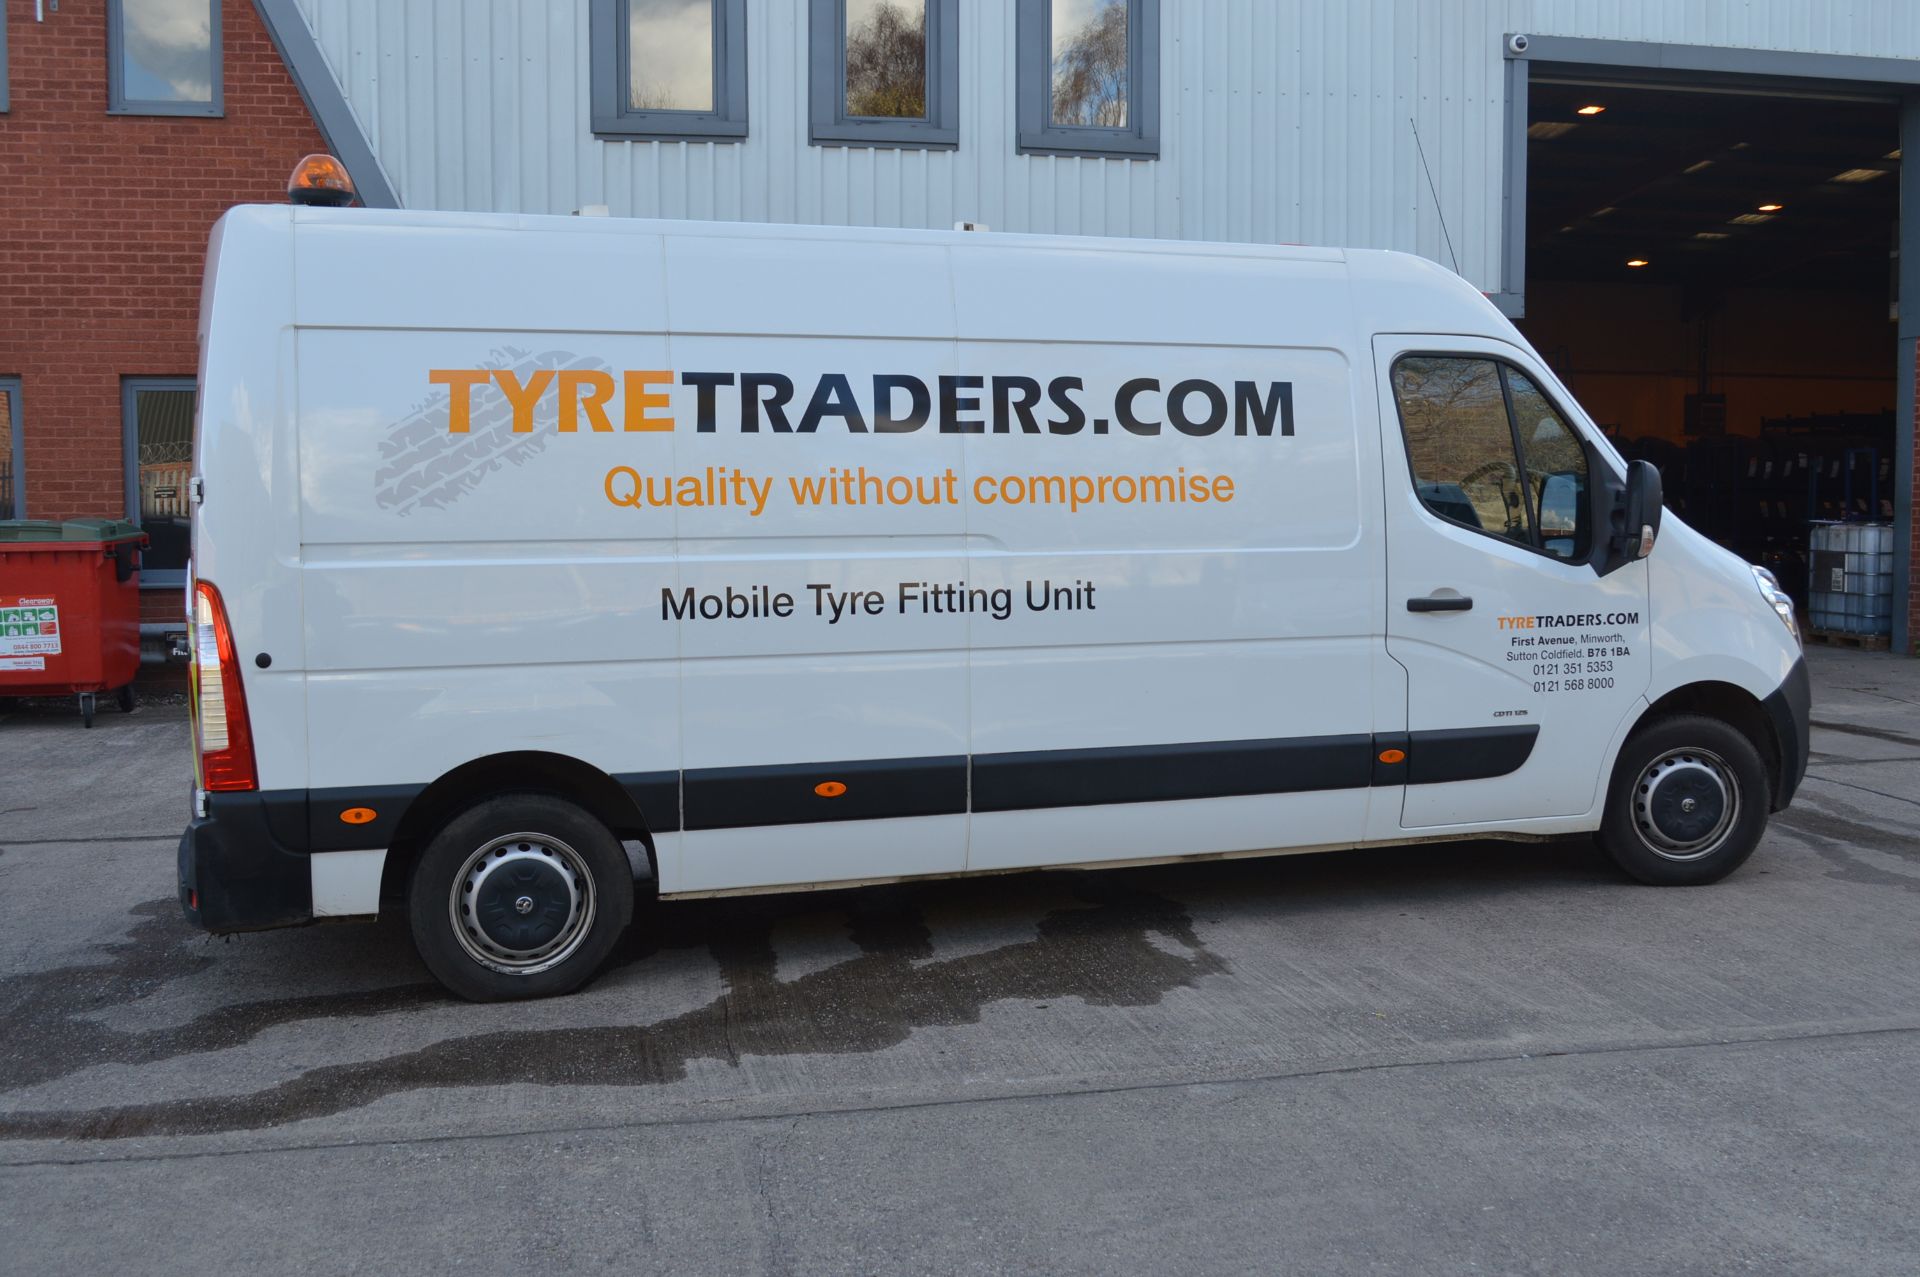 Vauxhall Movano F3500 L3 H2 CDTI 125 Mobile Tyre Service Van With Tom Tom Navigation & Tracker - Image 11 of 39